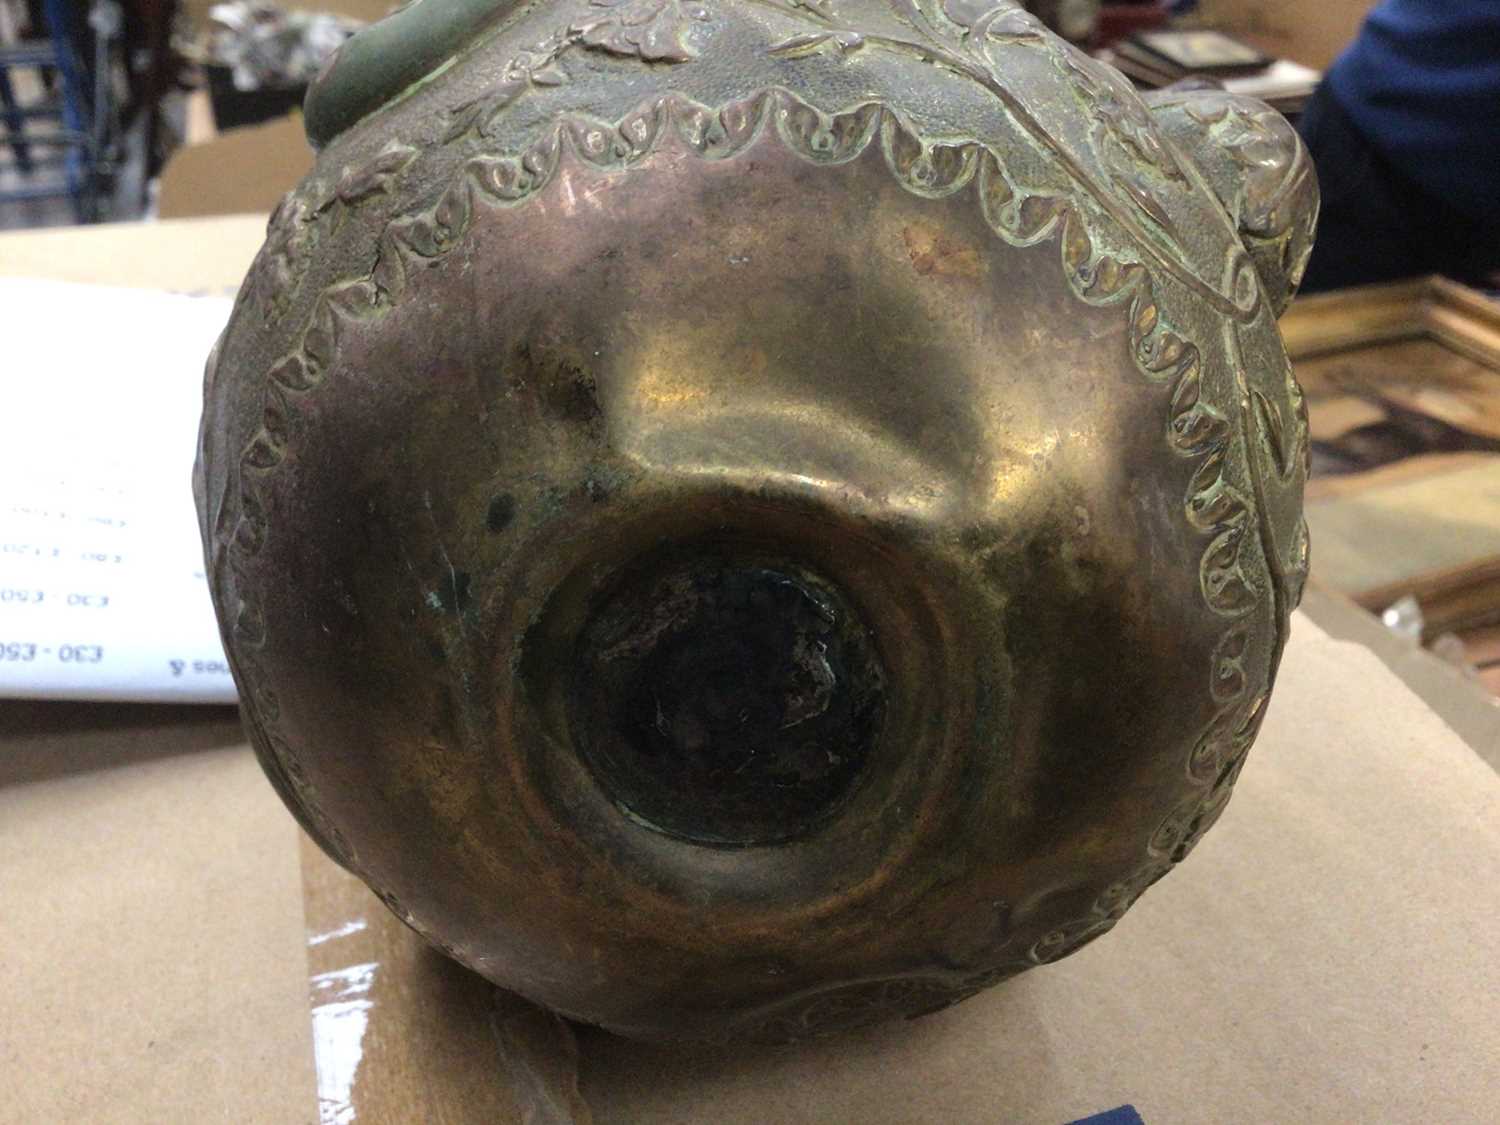 Antique Indian brass ewer with relief cast decoration - Image 2 of 2